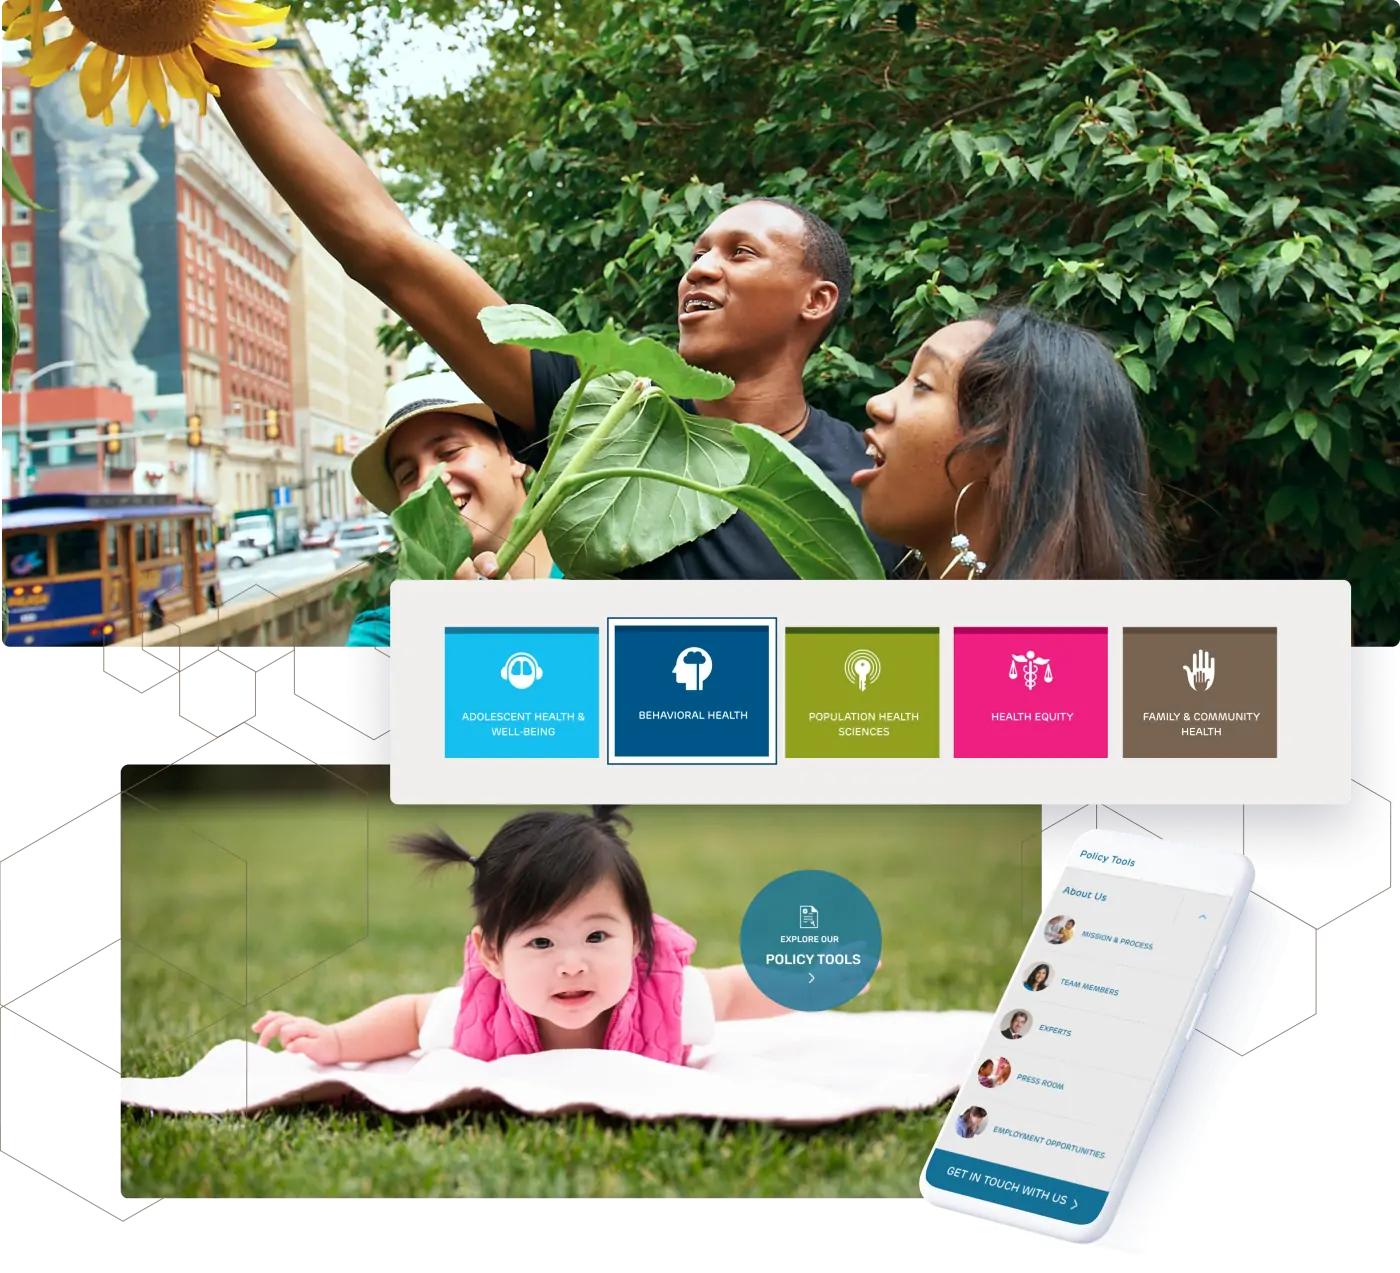 A collage of Policy Lab's new iconography for their website using bold shades of blue, green, and pink. In this collage, there is also a smartphone showcasing how the website looks on mobile. Highlighting the new color palette, the background shows two photos, the first is a group of teenagers picking a sunflower, and the second is the photo of a toddler laying on a blanket in some grass.